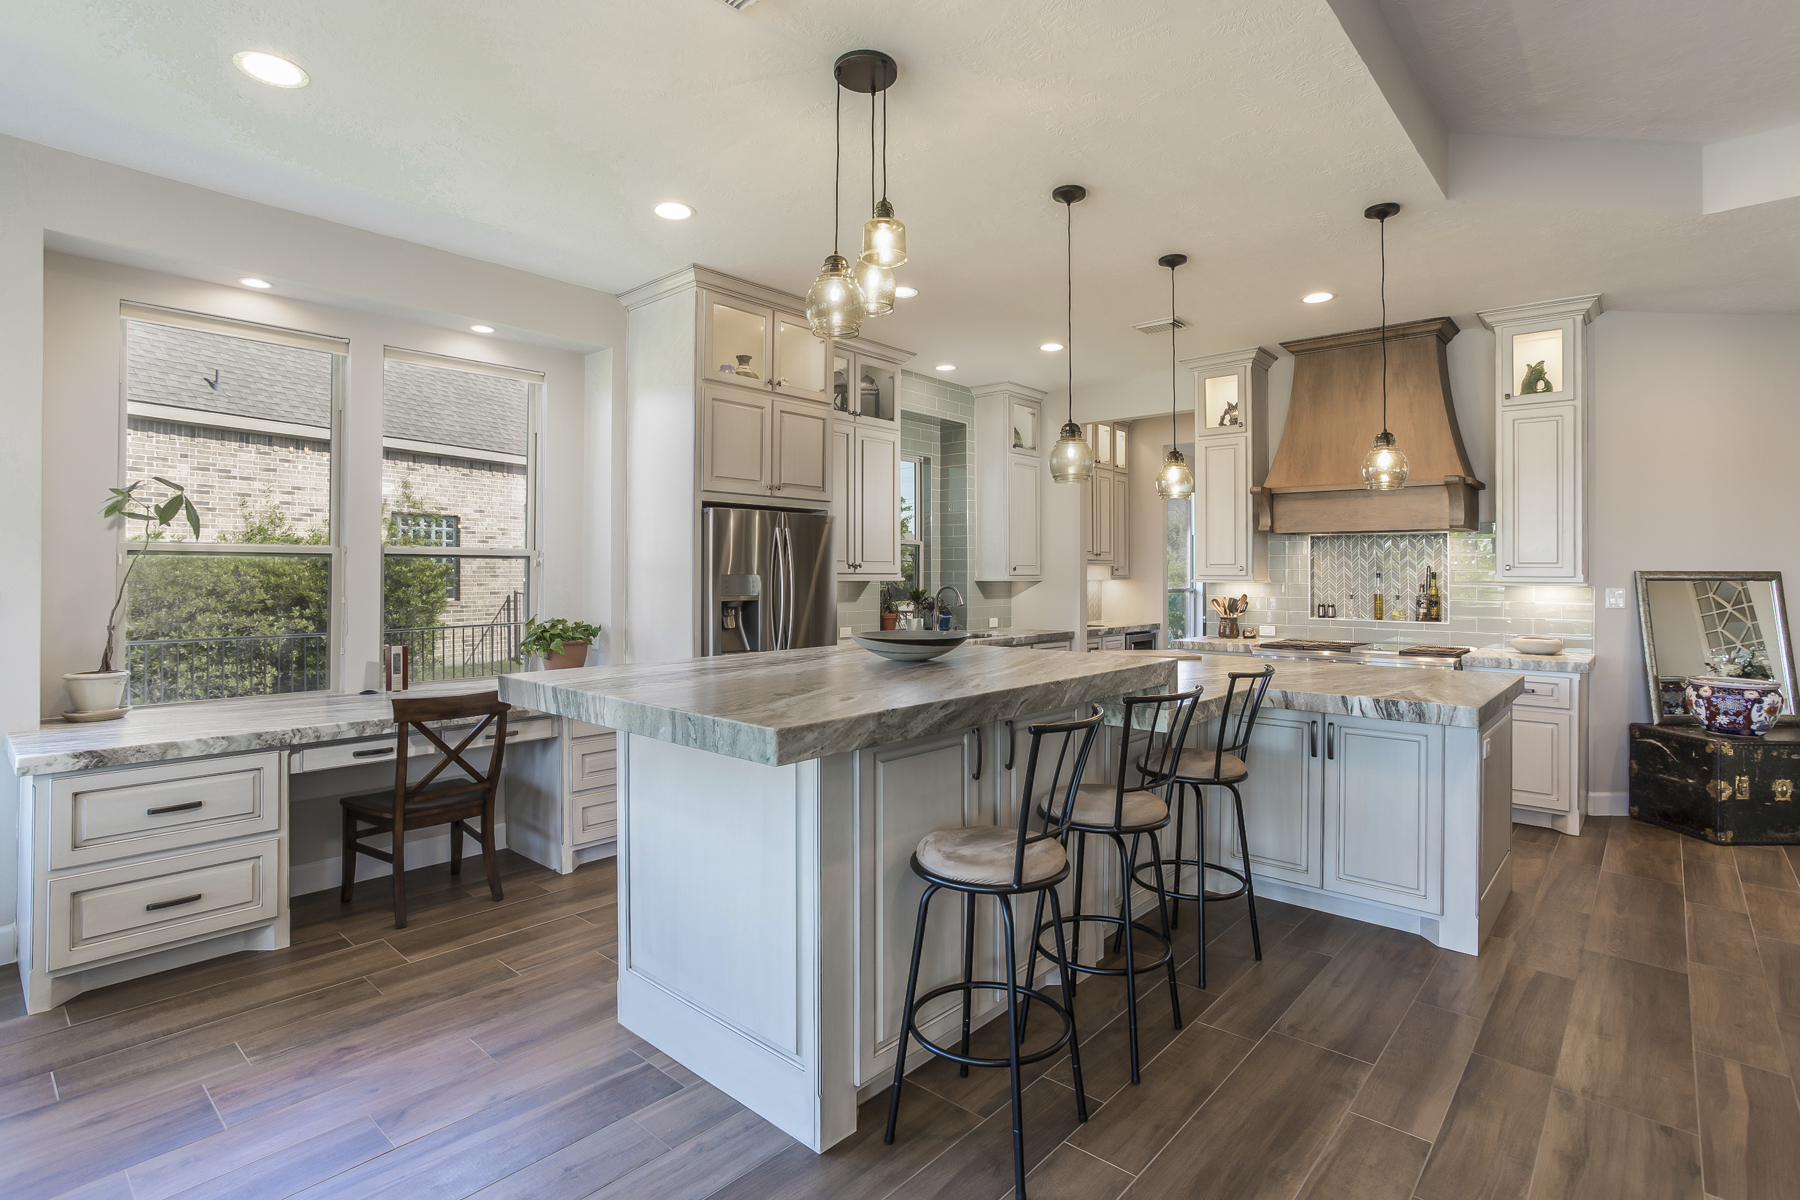 Morning Star Builders Featured on Home Bunch! | Morning Star Builders